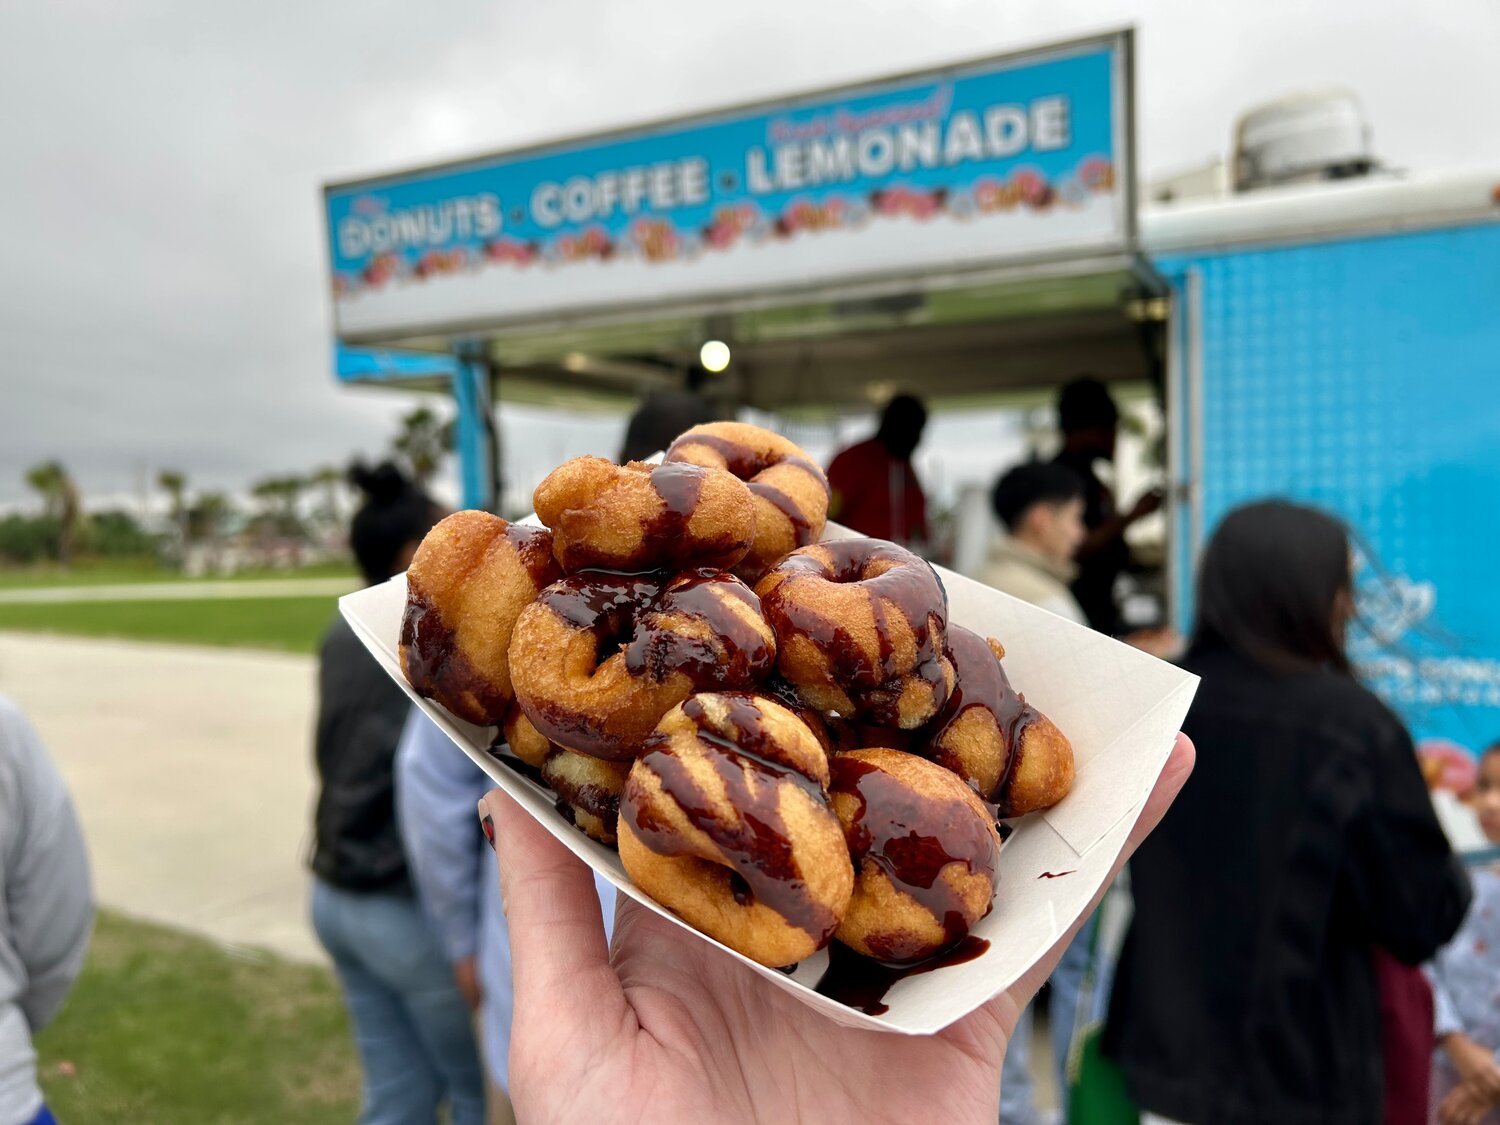 After all the savory, enjoy a little sweet from the Sugar & Sips Coffee & Donut Company food truck